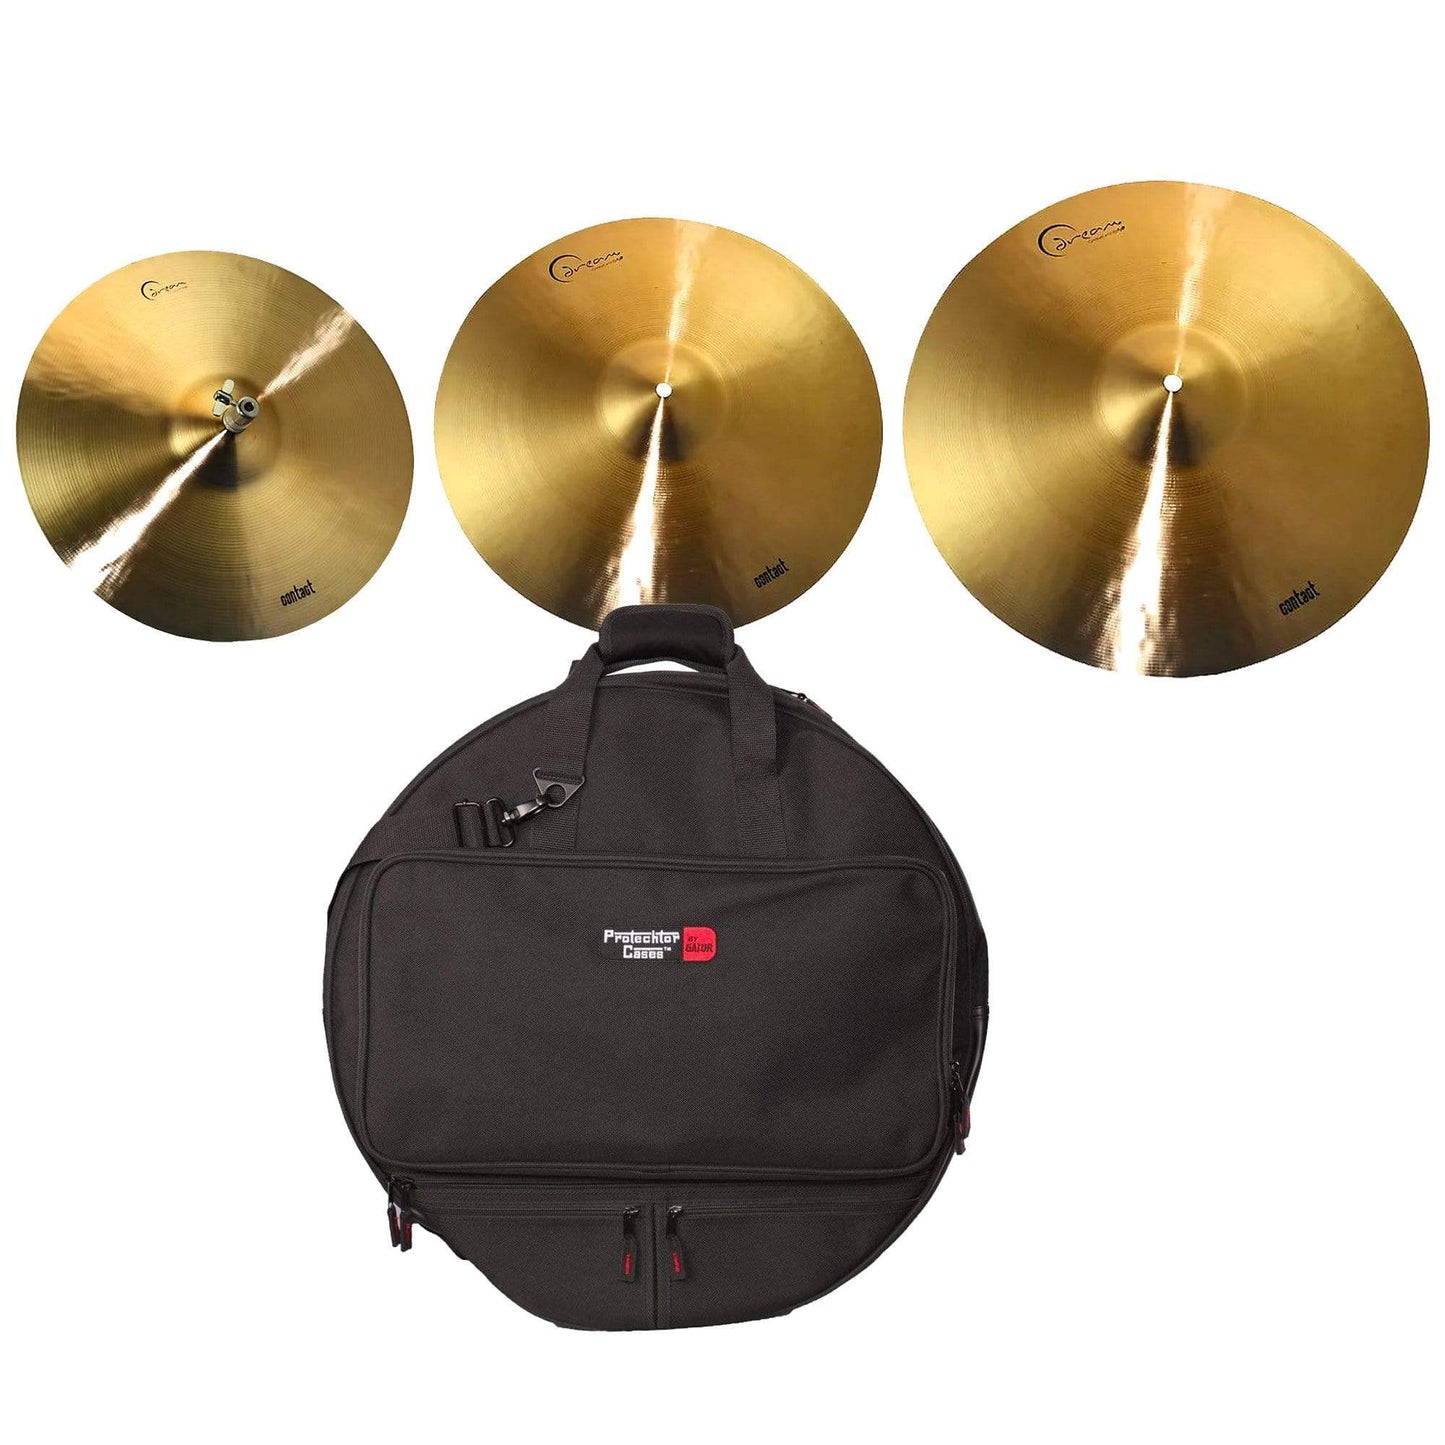 Dream 14/18/22" Dream Contact Cymbal Set (w/Gator 22" Backpack Cymbal Bag) Drums and Percussion / Cymbals / Cymbal Packs